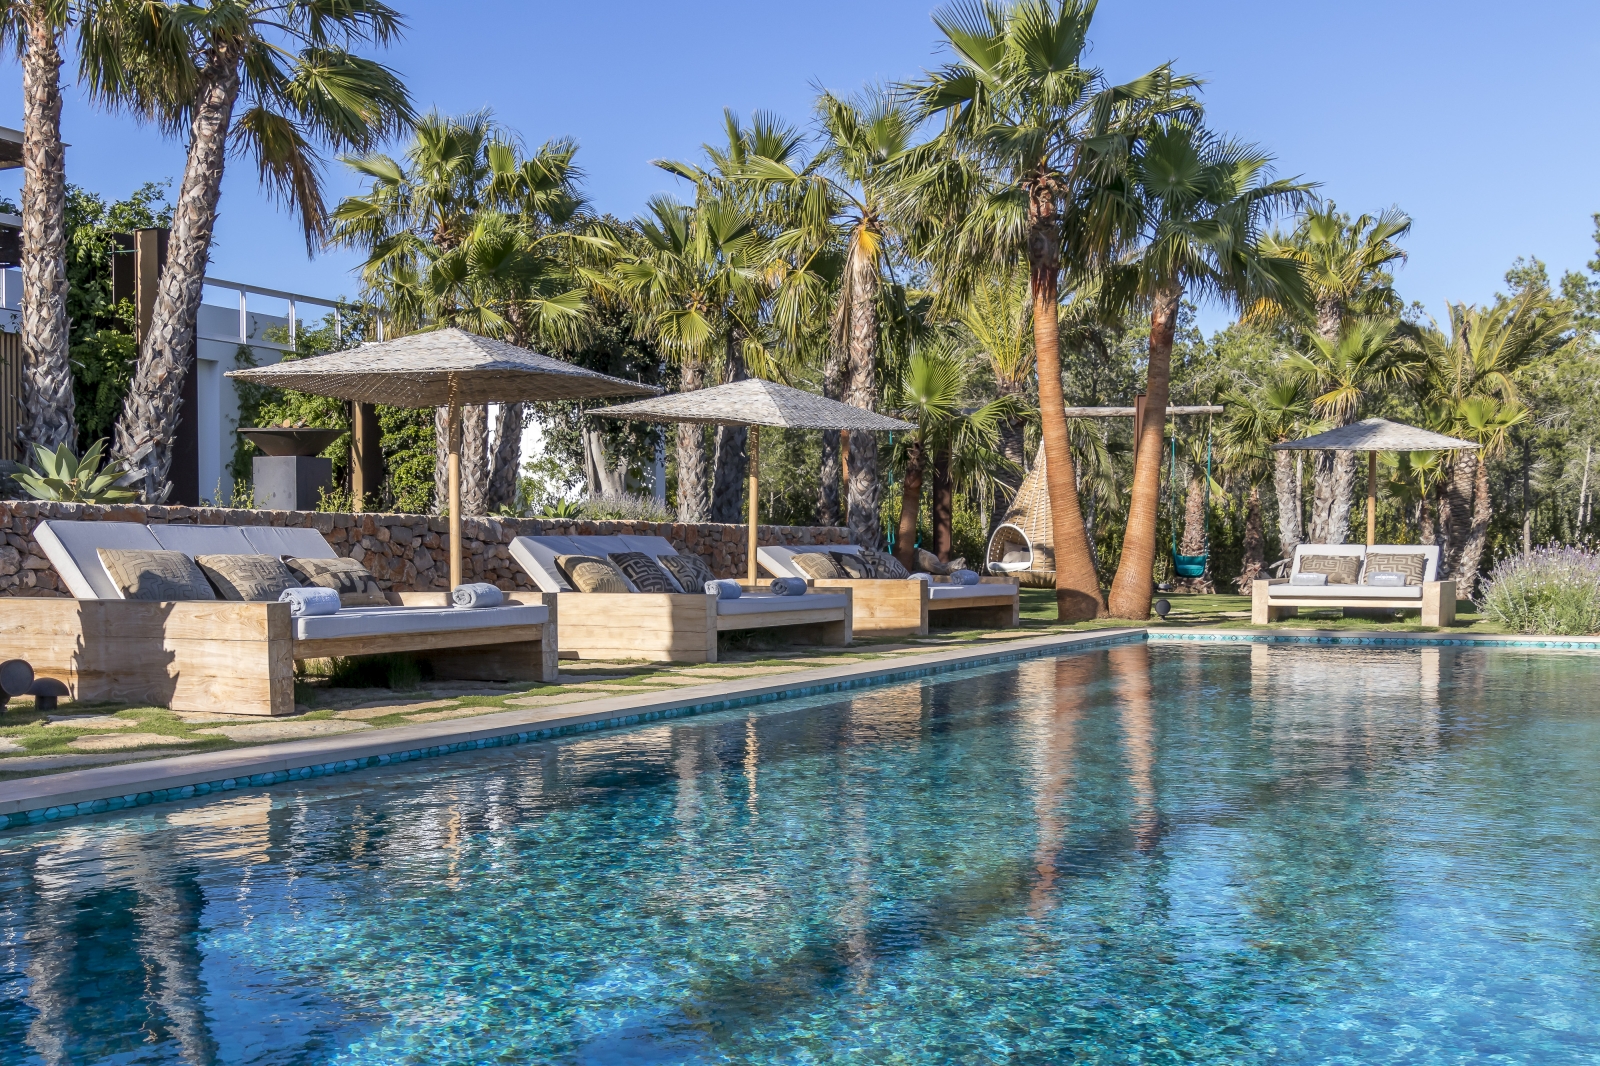 four wide sunloungers along the pool before a backgground of palms